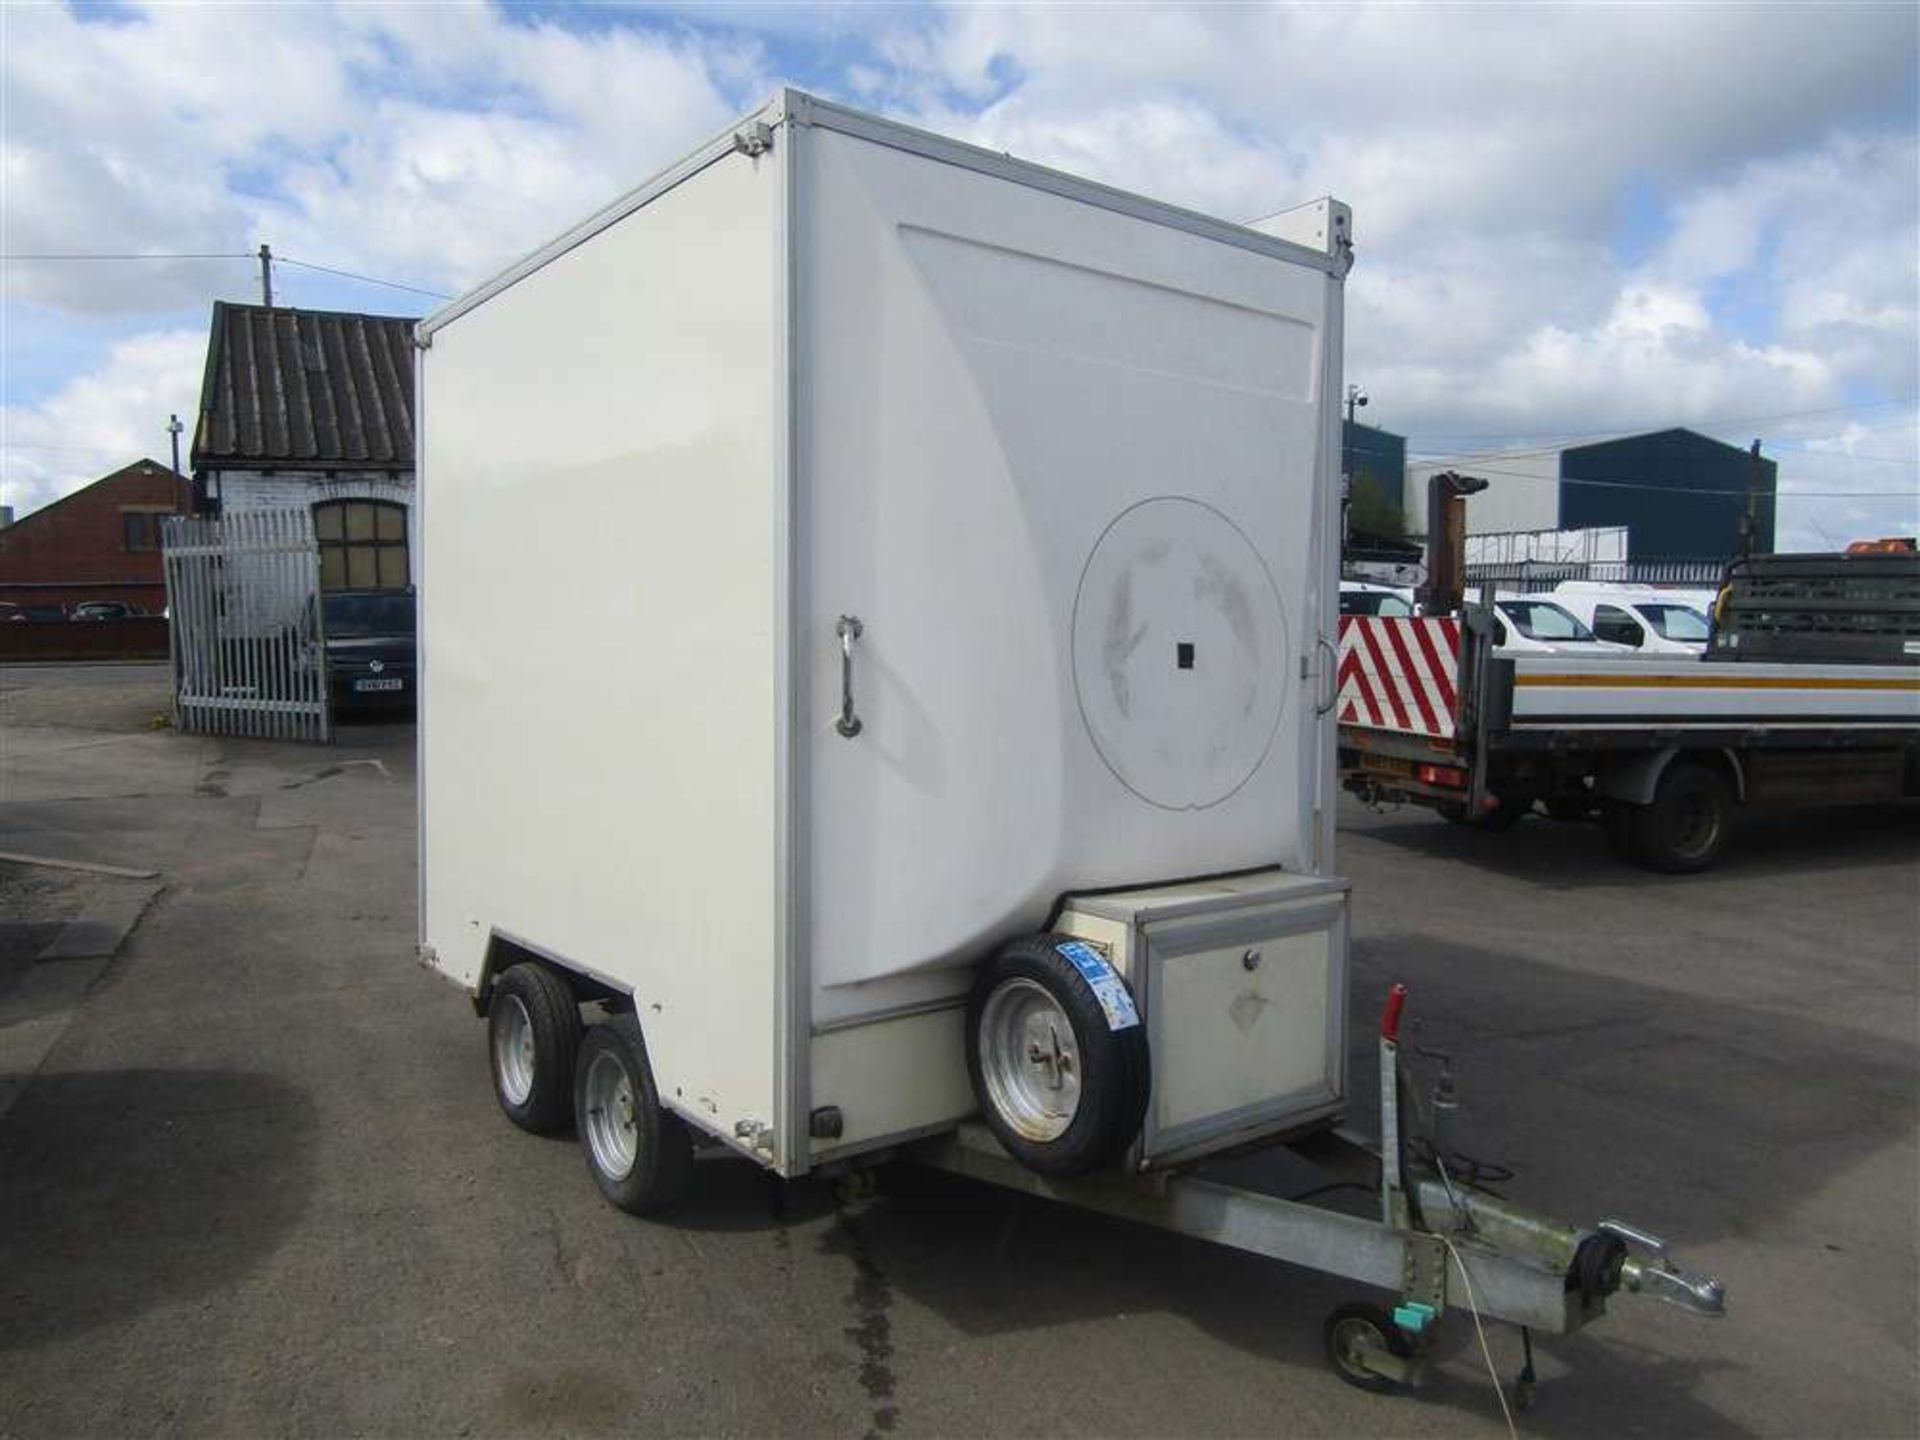 Lynton Exhibition Trailer c/w Serving Counter & Roll Out Awning, Kitchenette